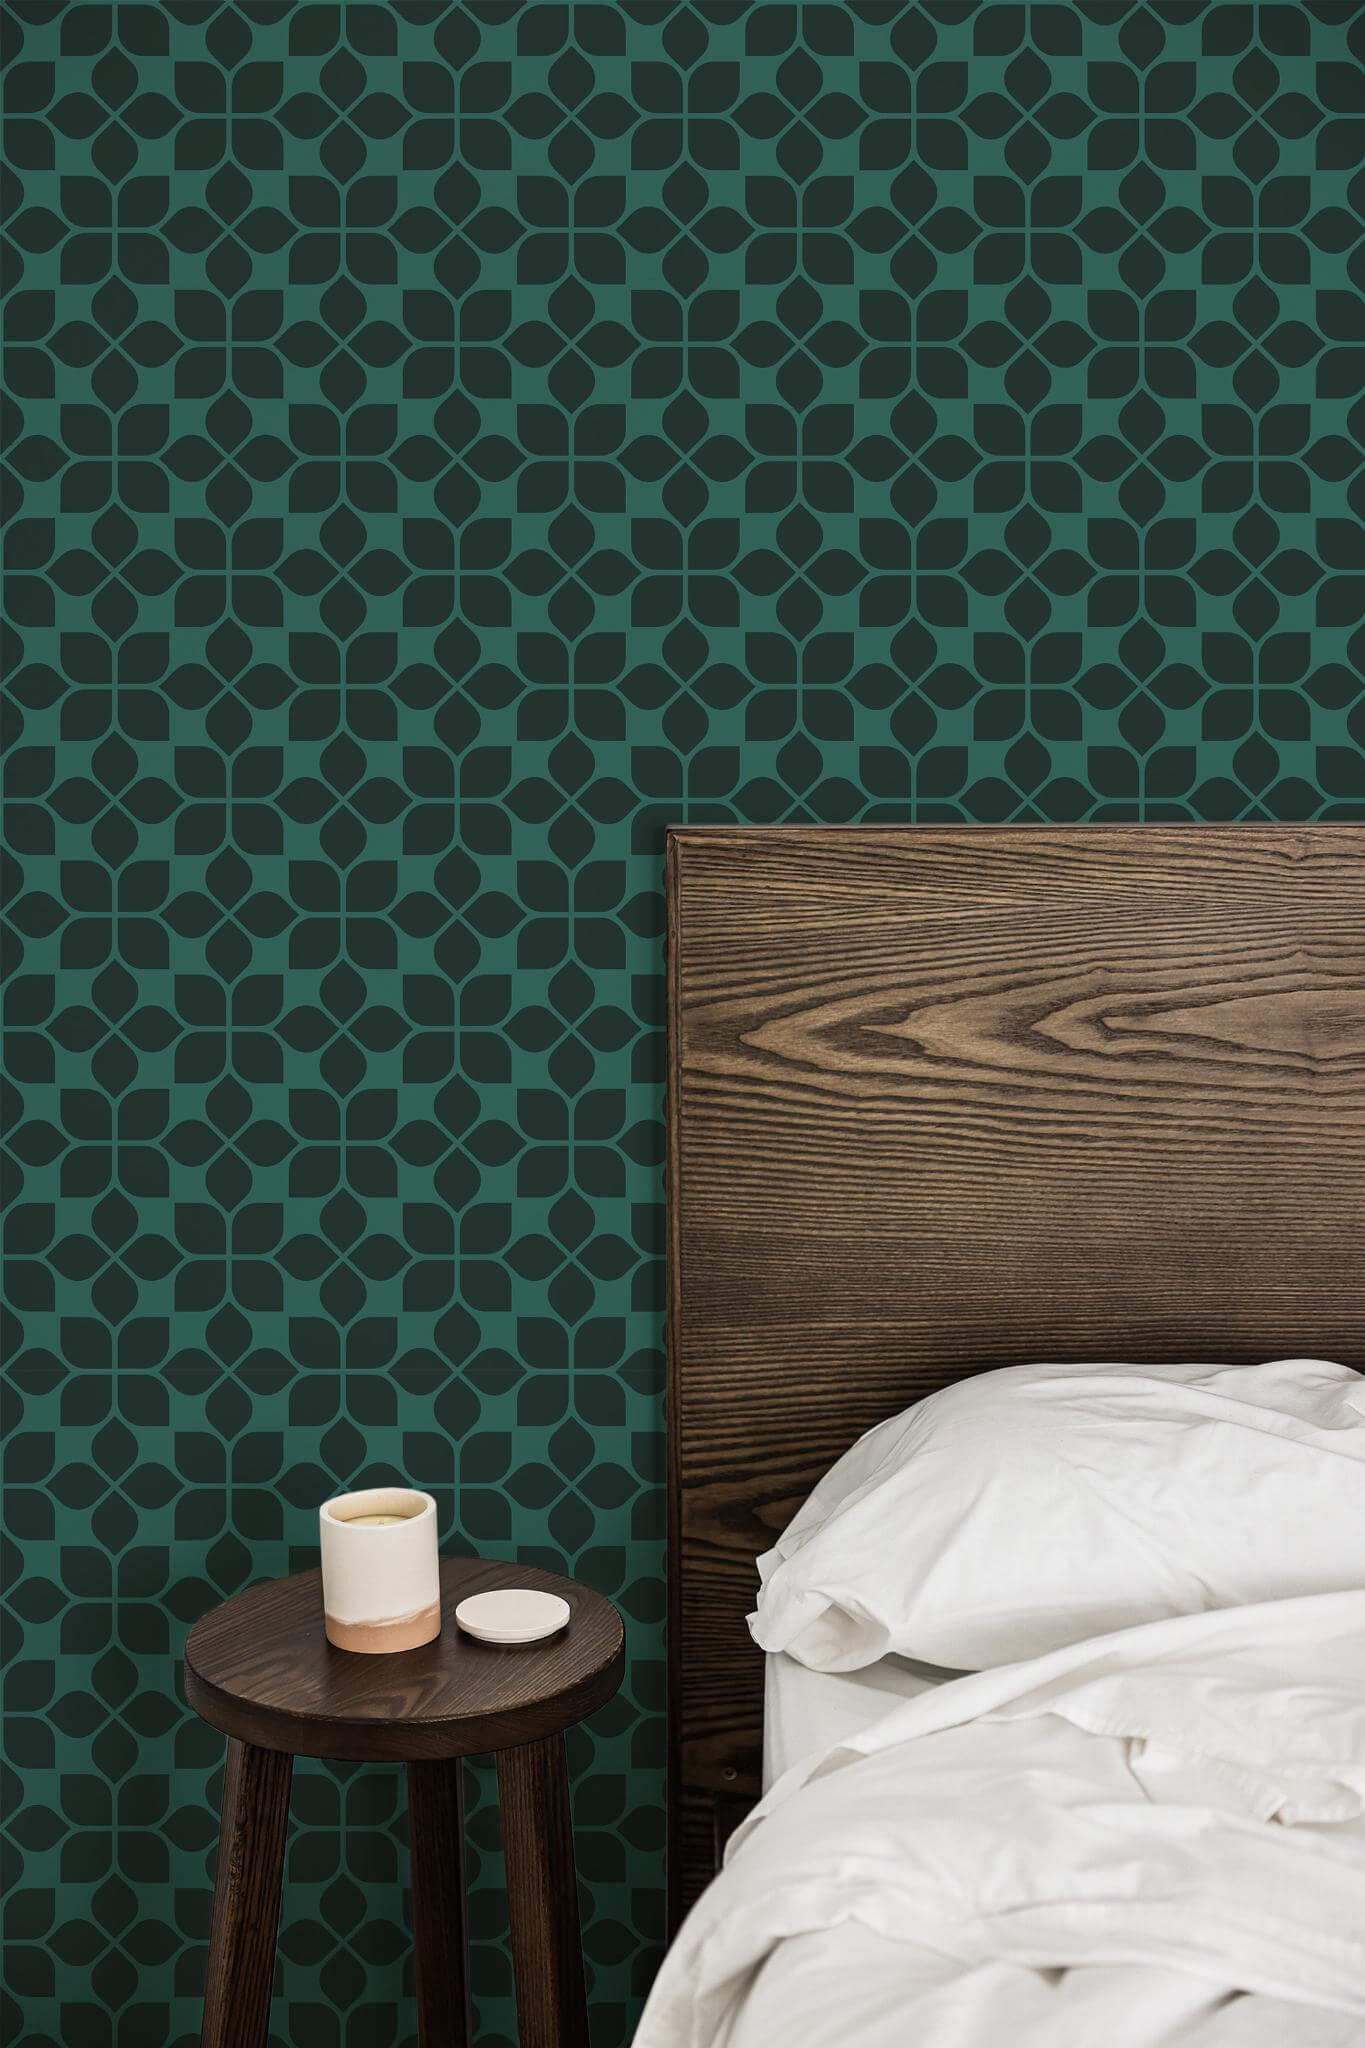 Forest green tile Wallpaper - Peel and Stick or Non-Pasted